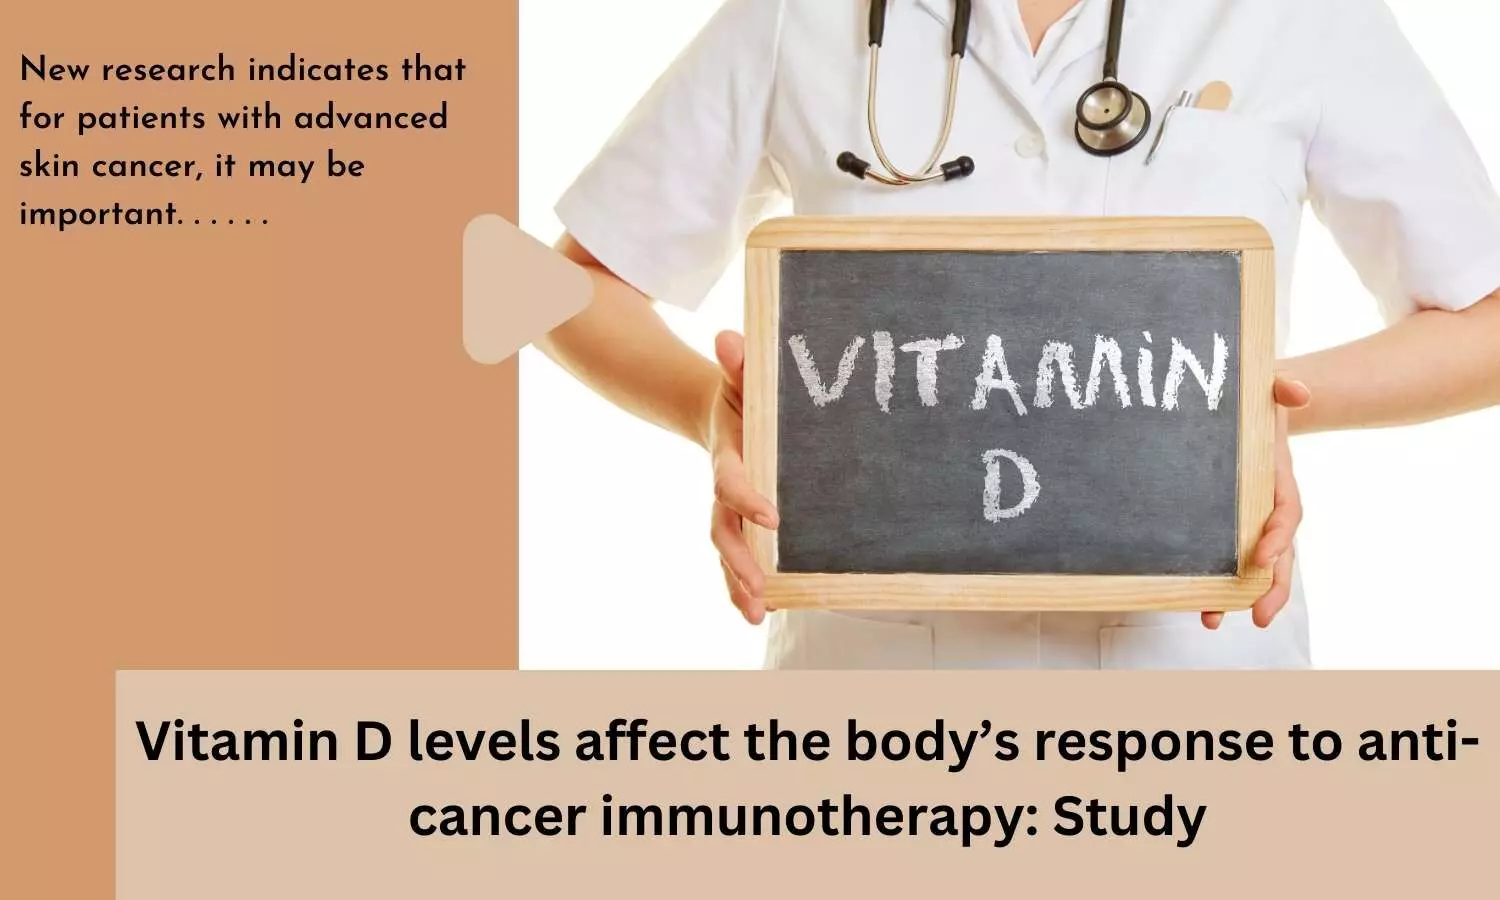 Vitamin D levels affect the bodys response to anti-cancer immunotherapy: Study